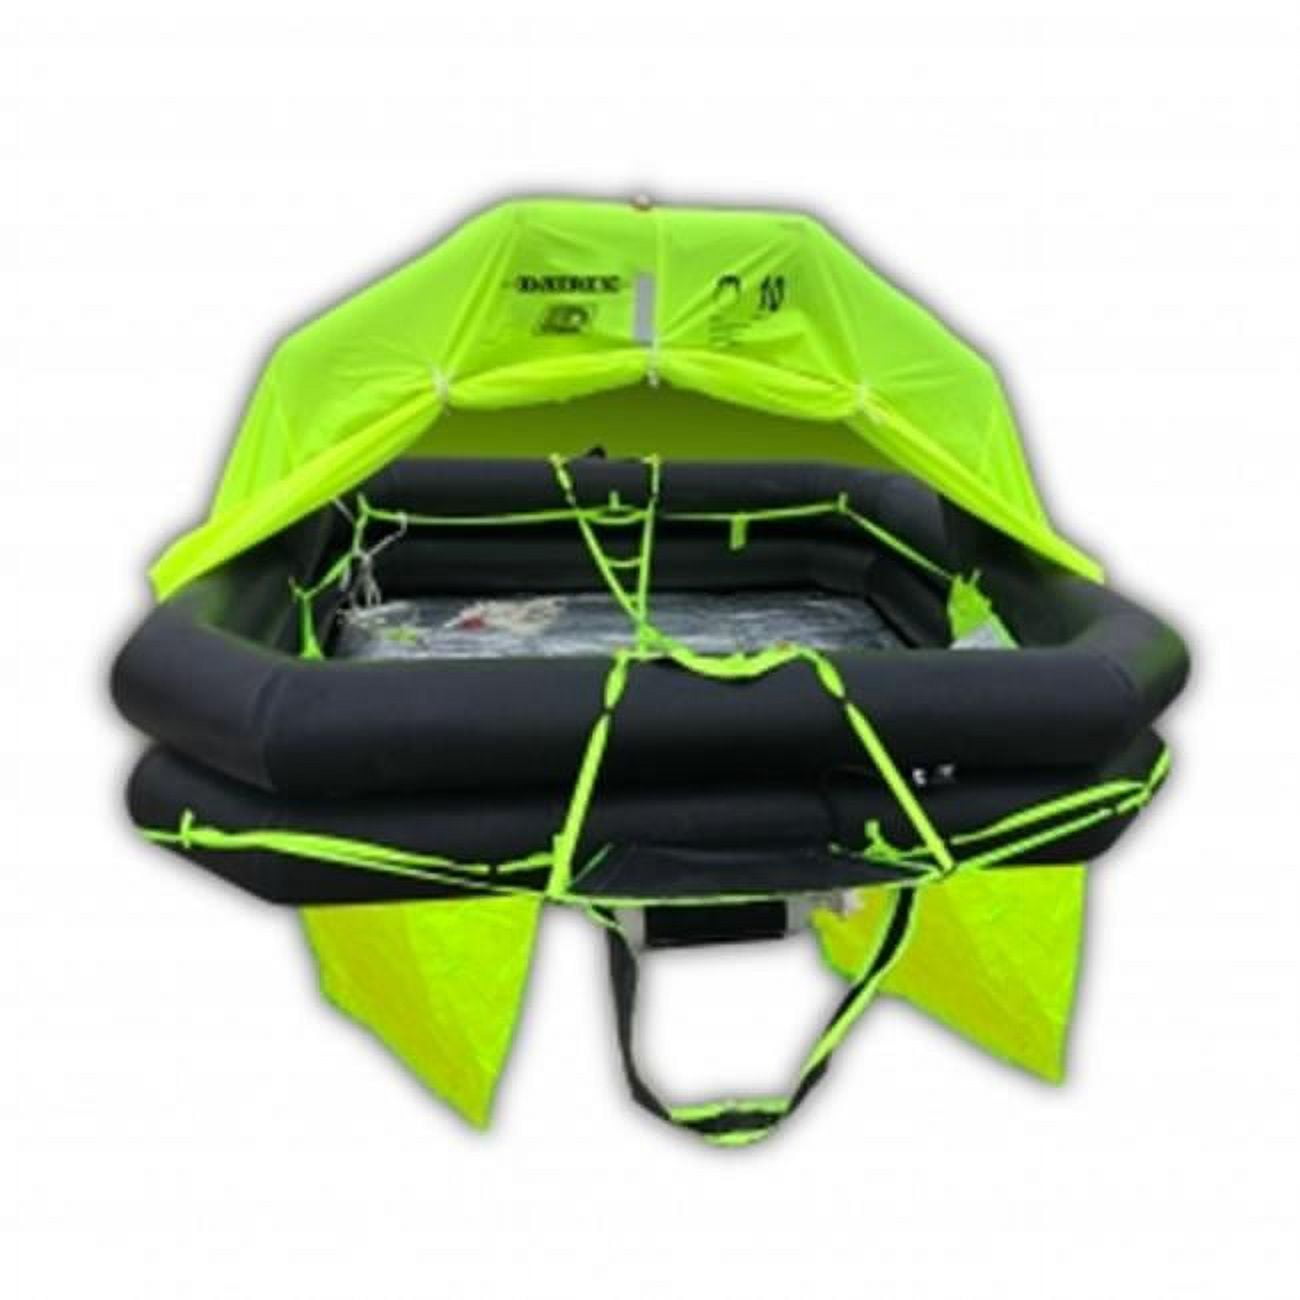 DUY4SVR 4 Person Liberty Recreational Offshore Raft with Liferaft in Valise -  Datrex